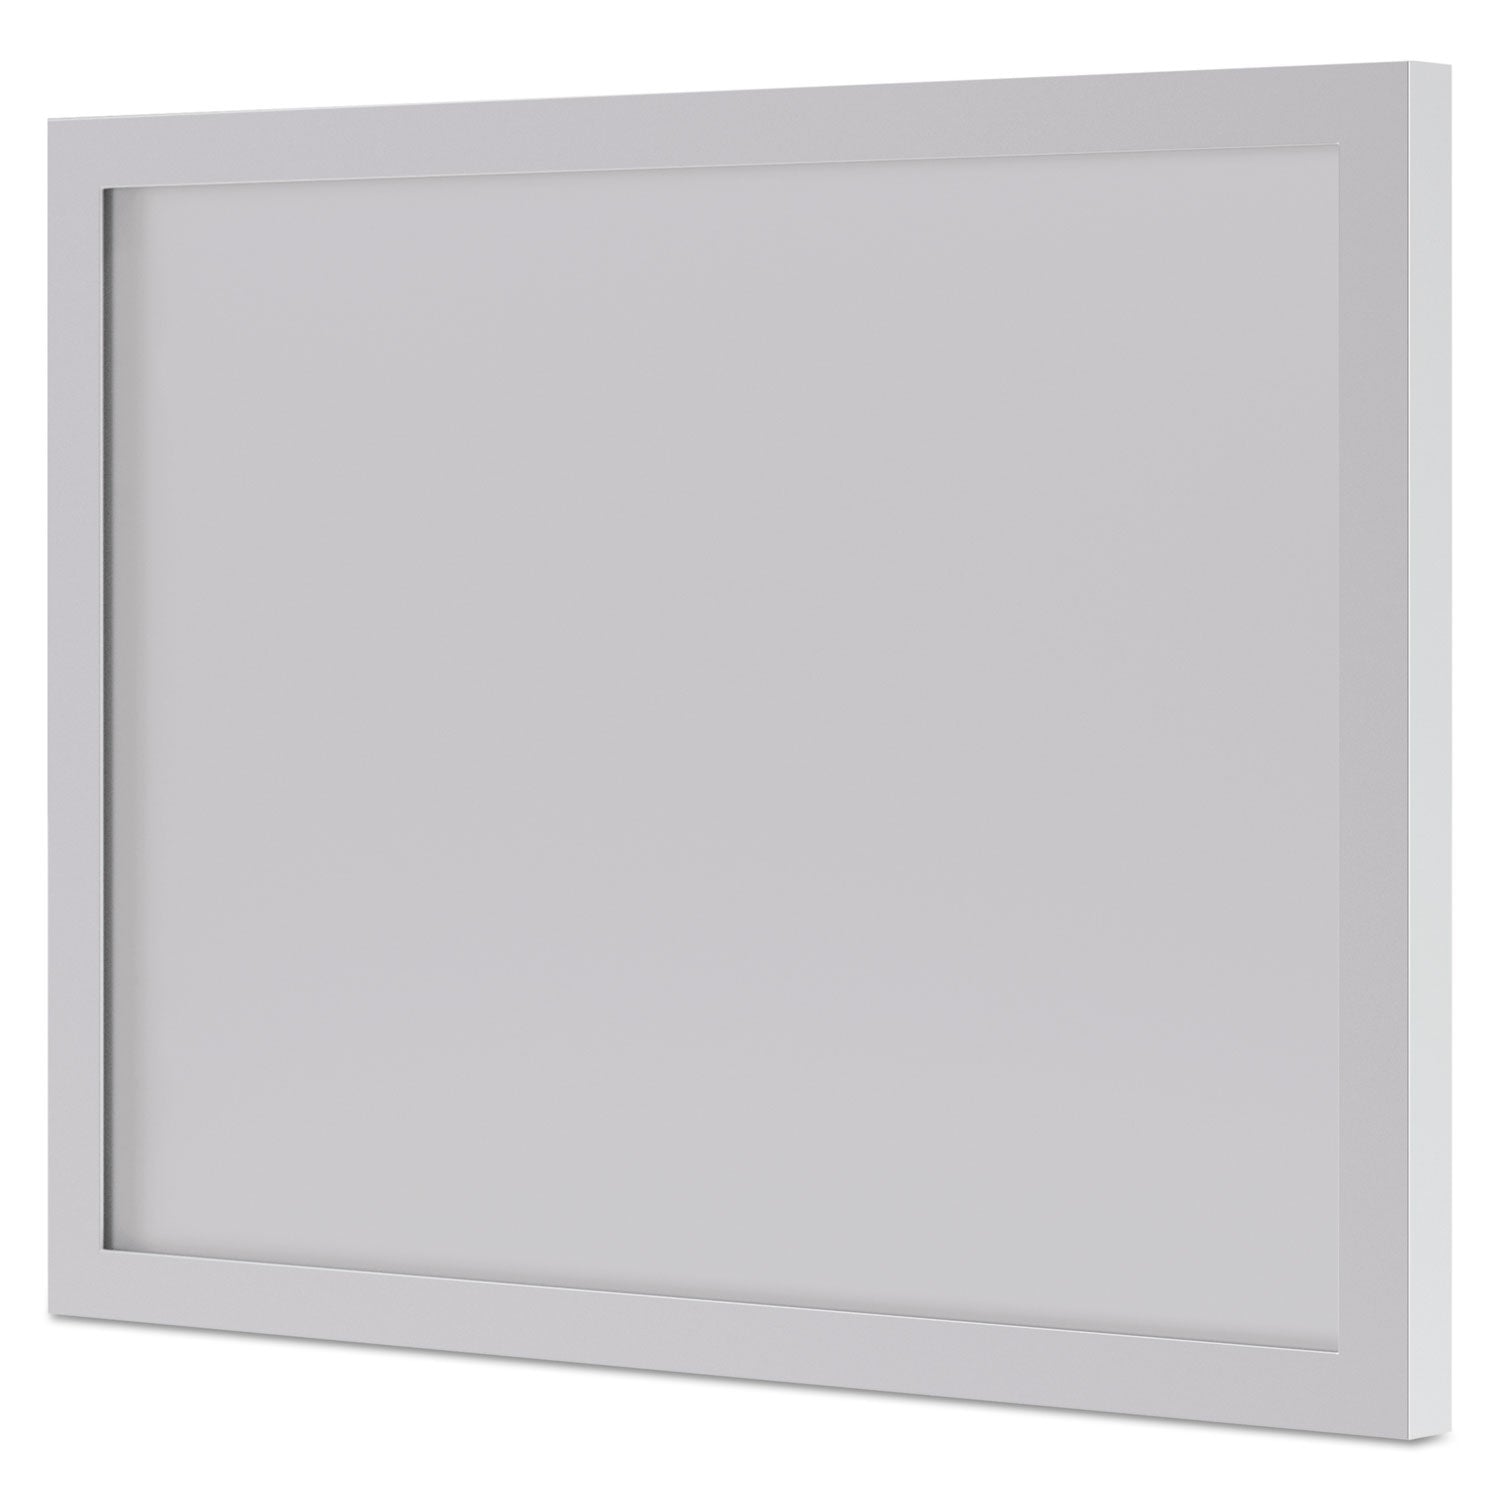 bl-series-frosted-glass-modesty-panel-395w-x-013d-x-2725h-silver-frosted_bsxblbf72modg - 1